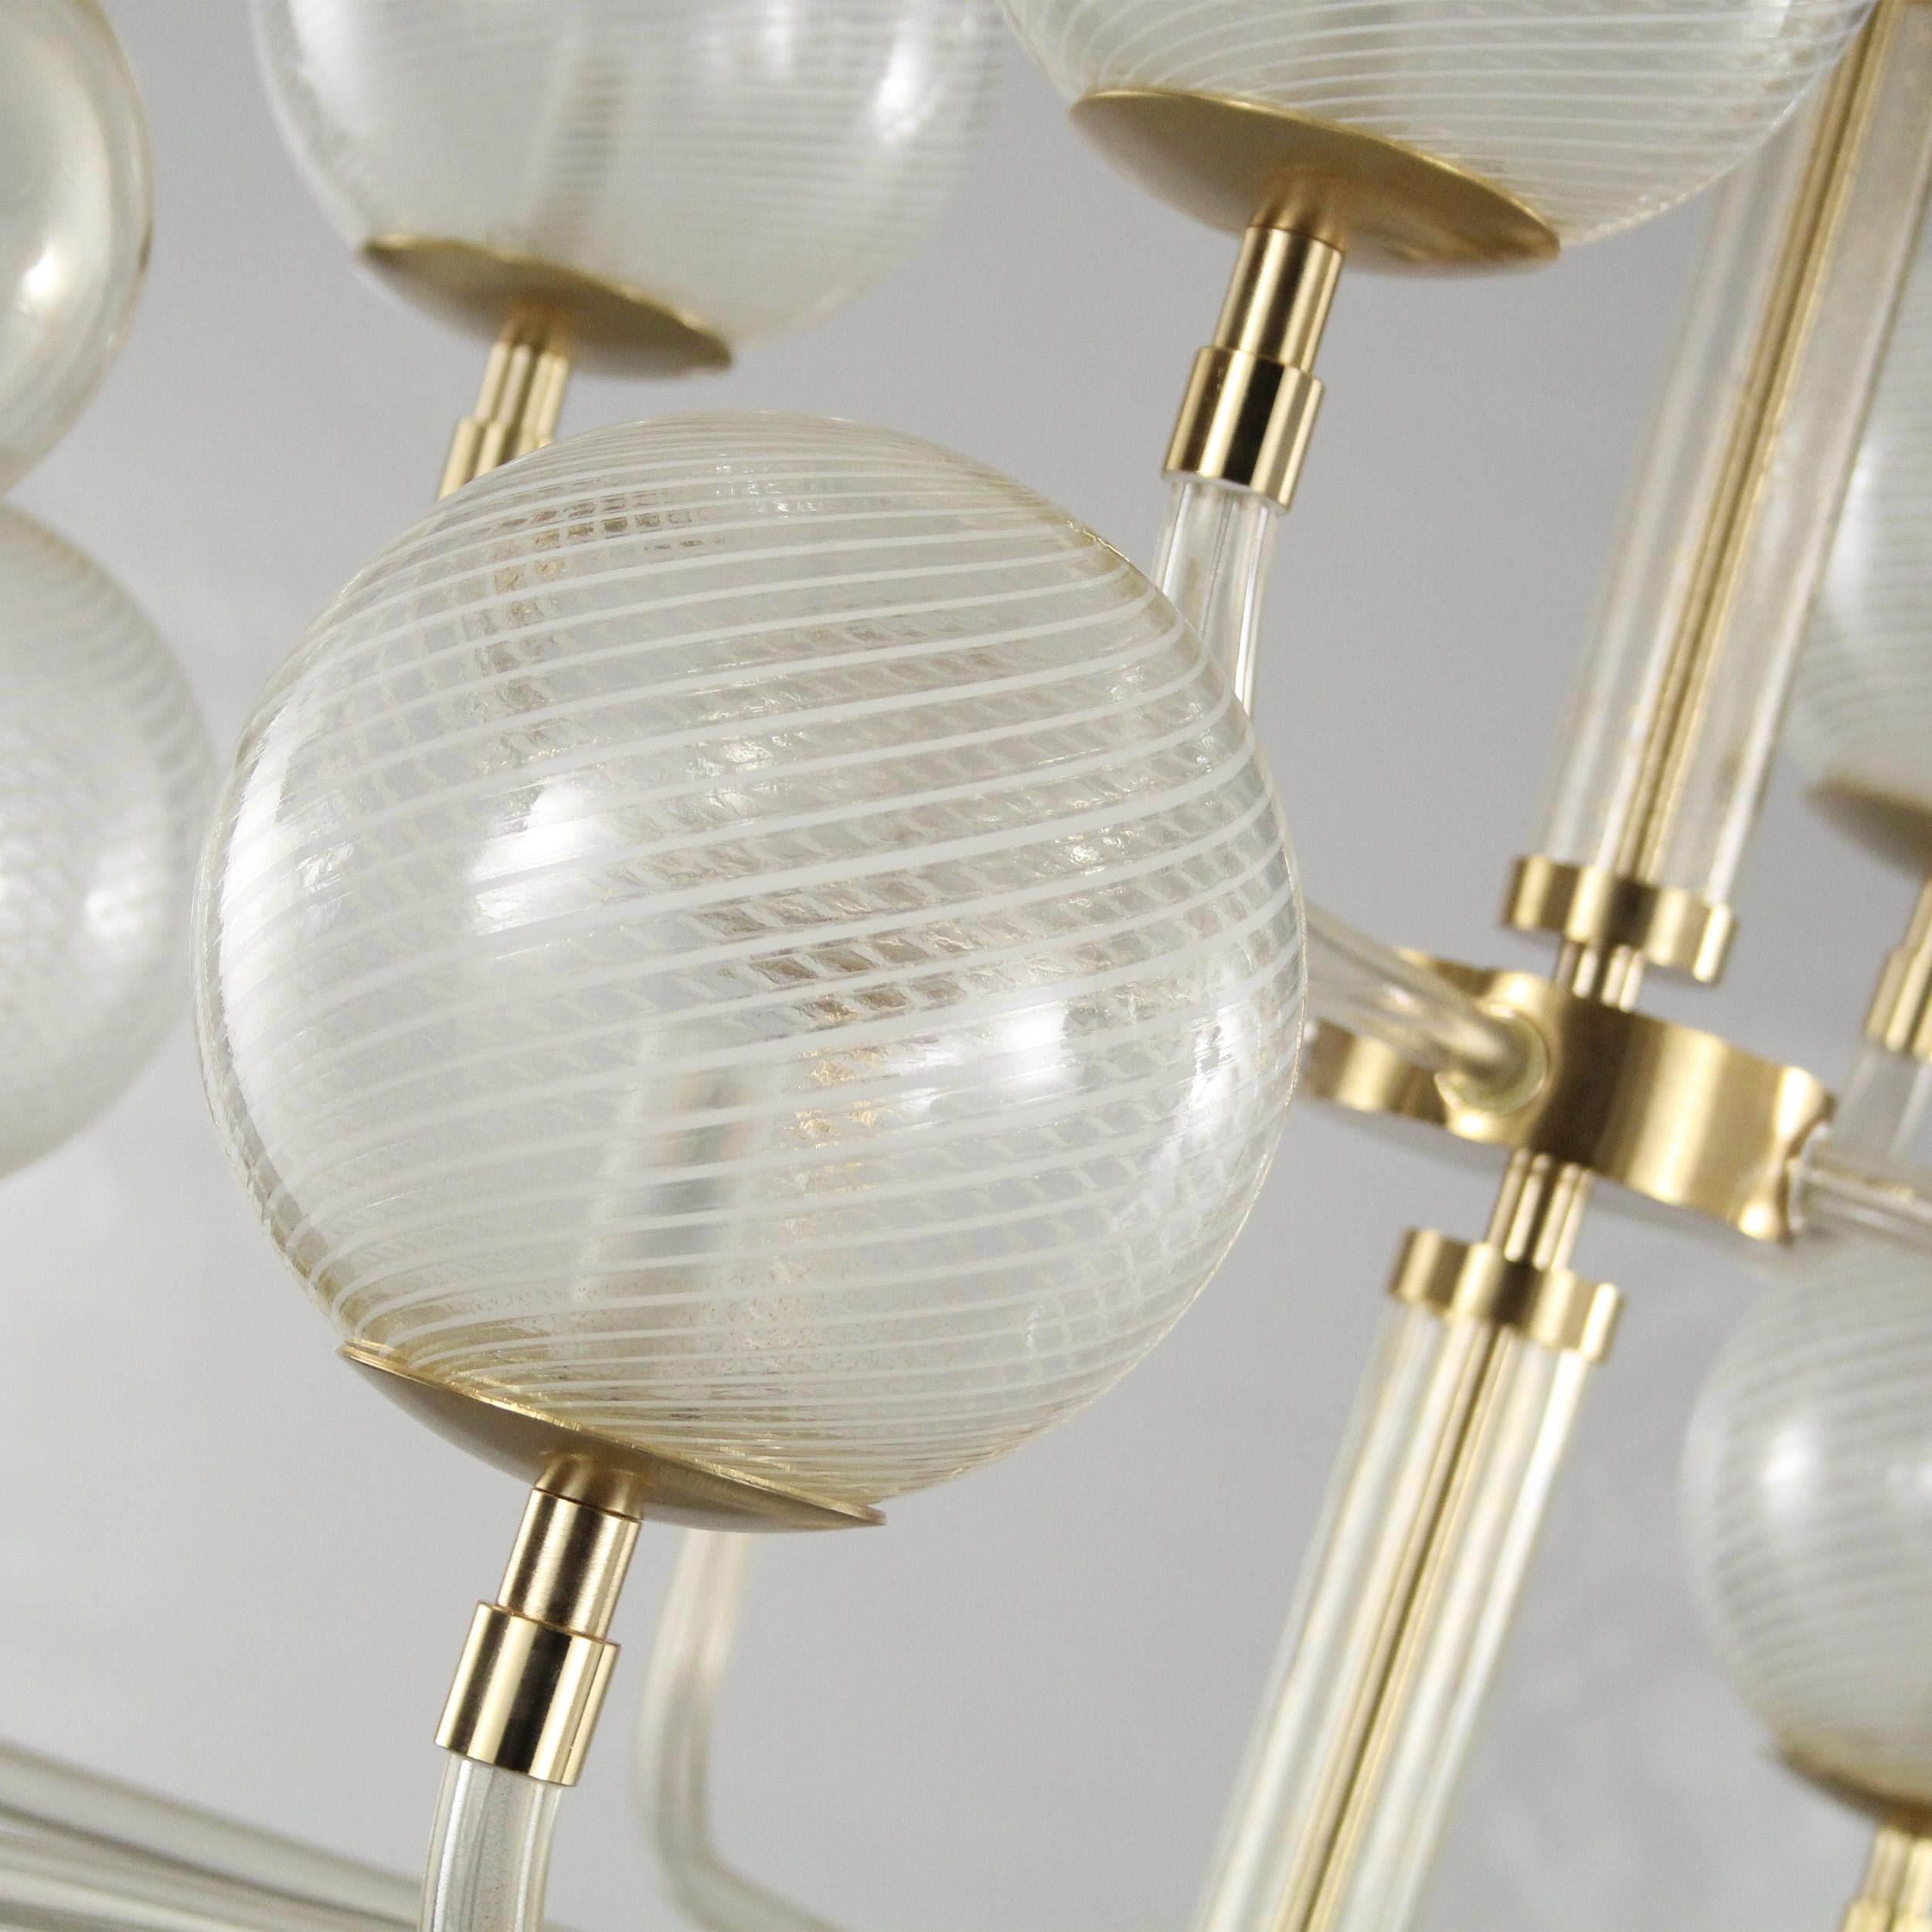 Blown Glass Chandelier 8+4 Lights, Spheres in Gold Leaf-White Filigree B&L by Multiforme For Sale